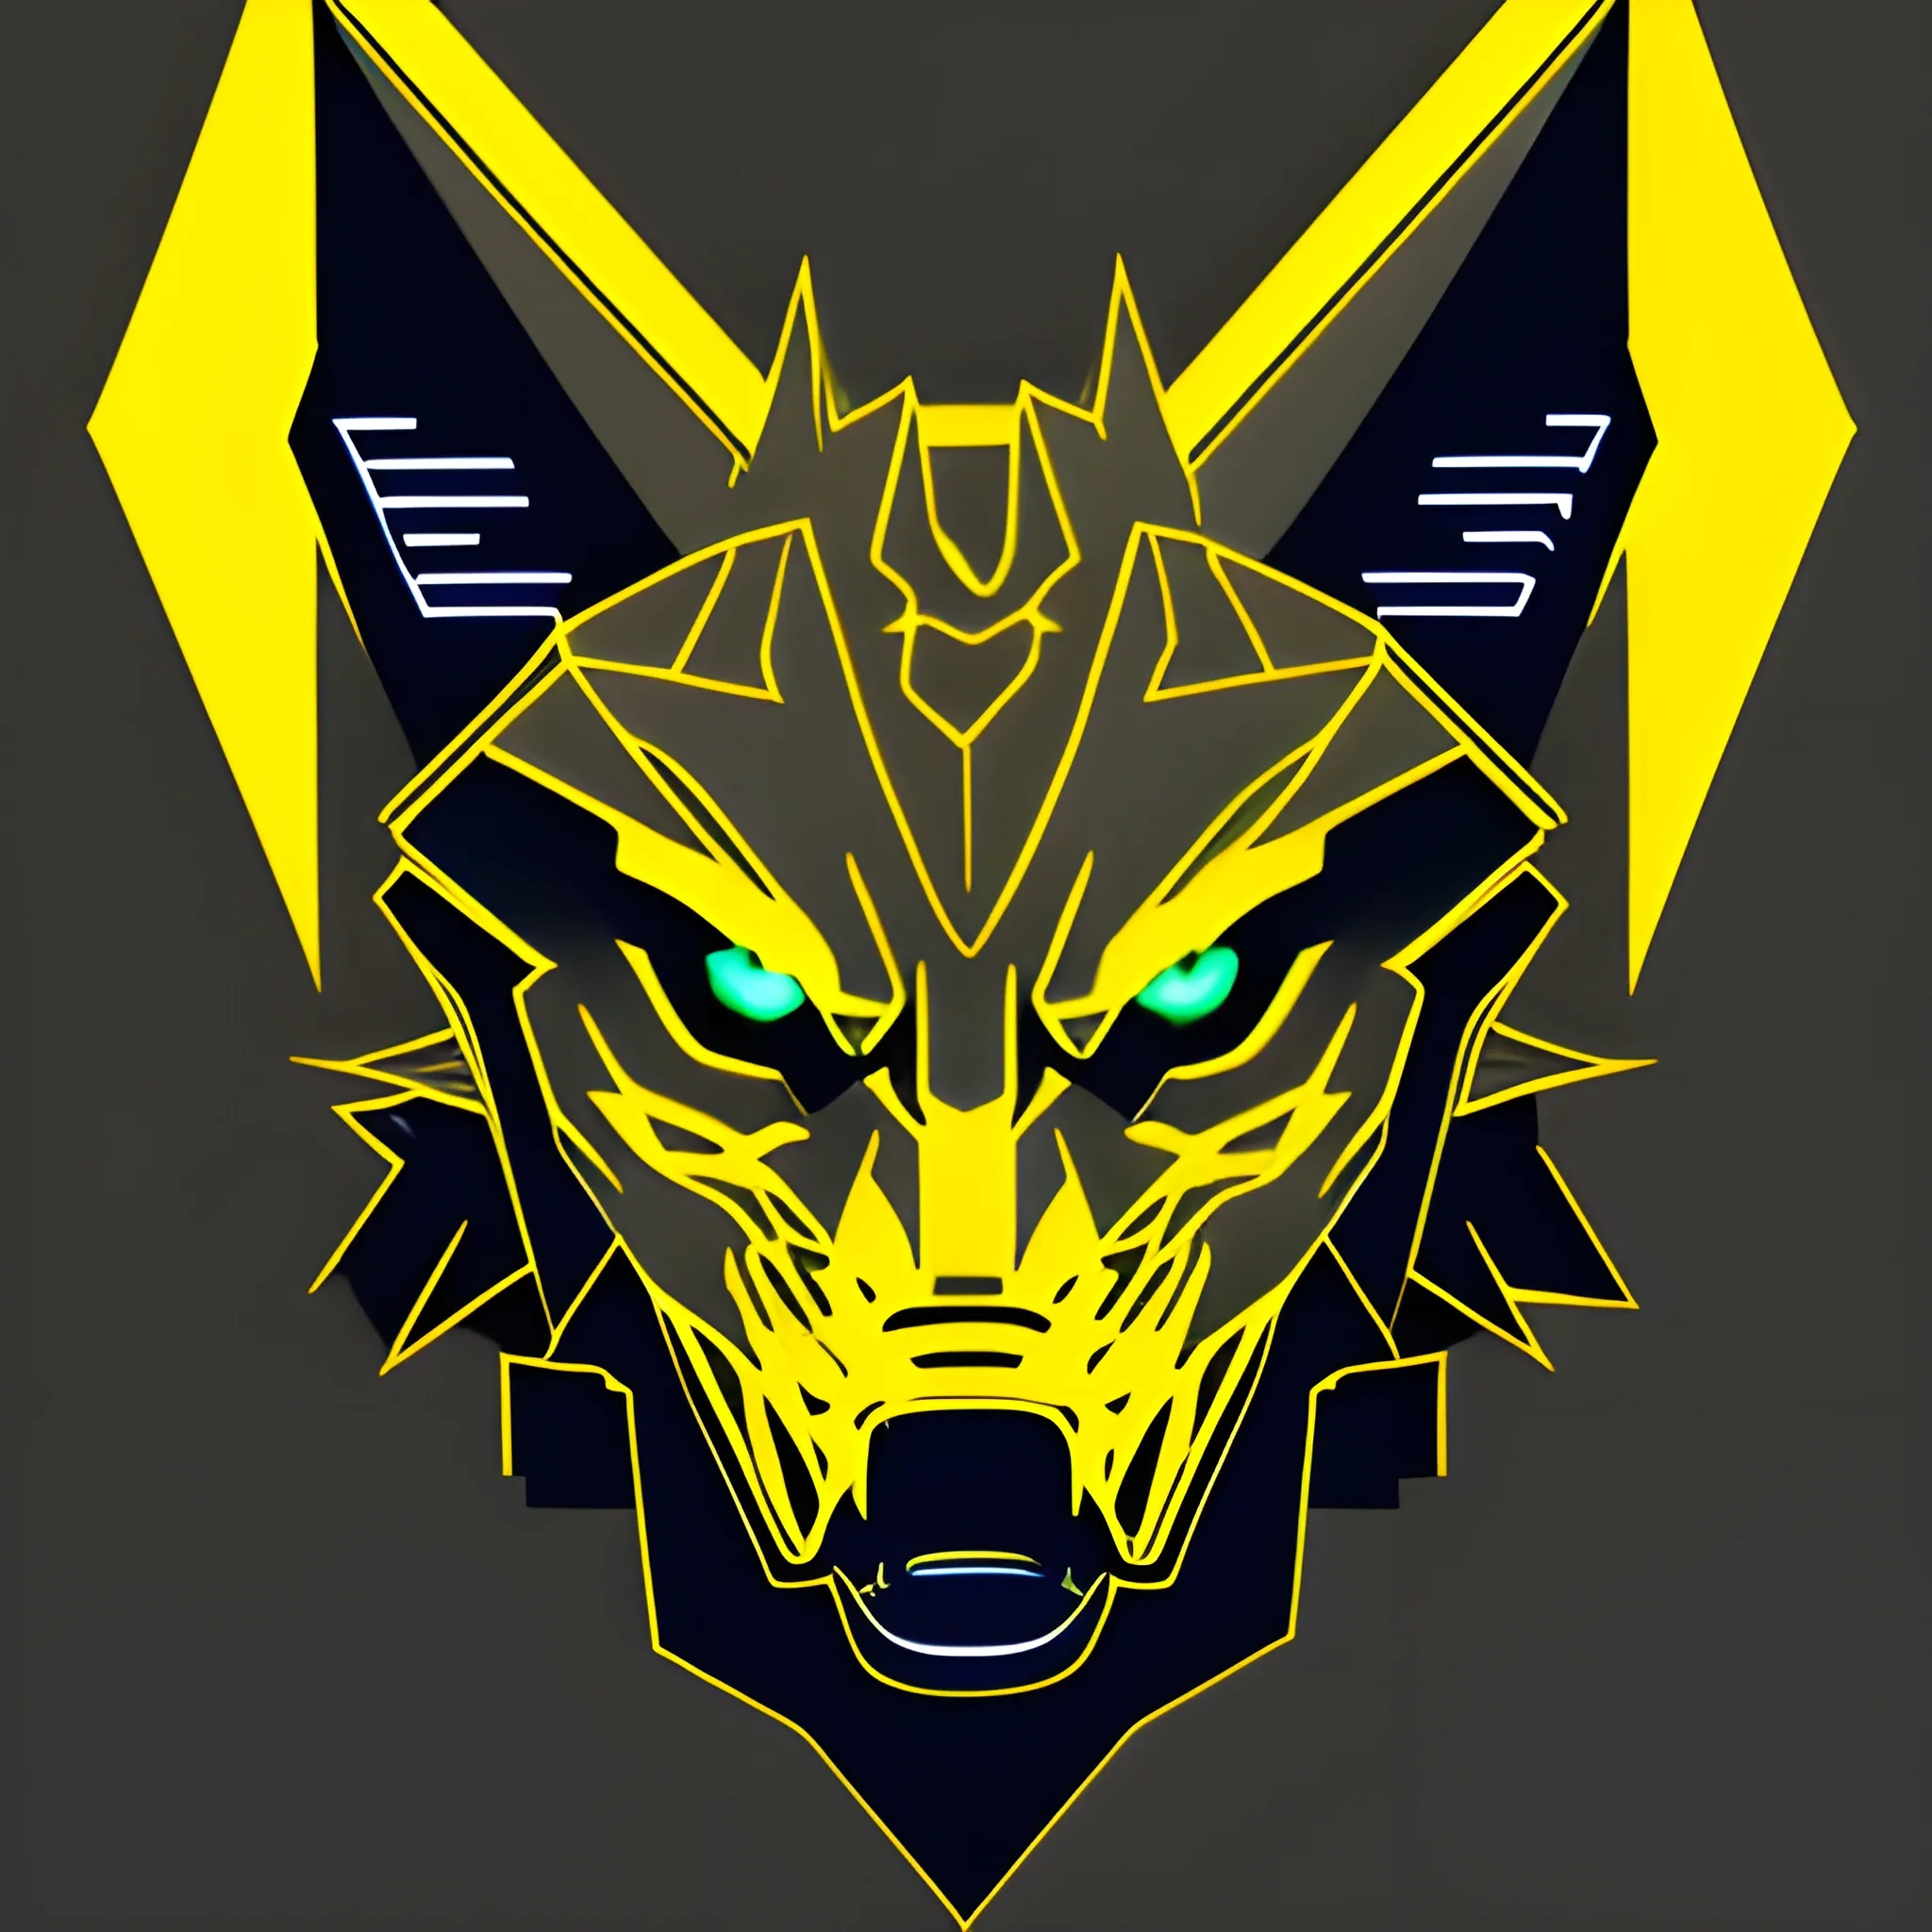 An angry cyberpunk wolf VECTOR logo, using GOLDEN yellow AND GRAY PALLETTE color., Trippy